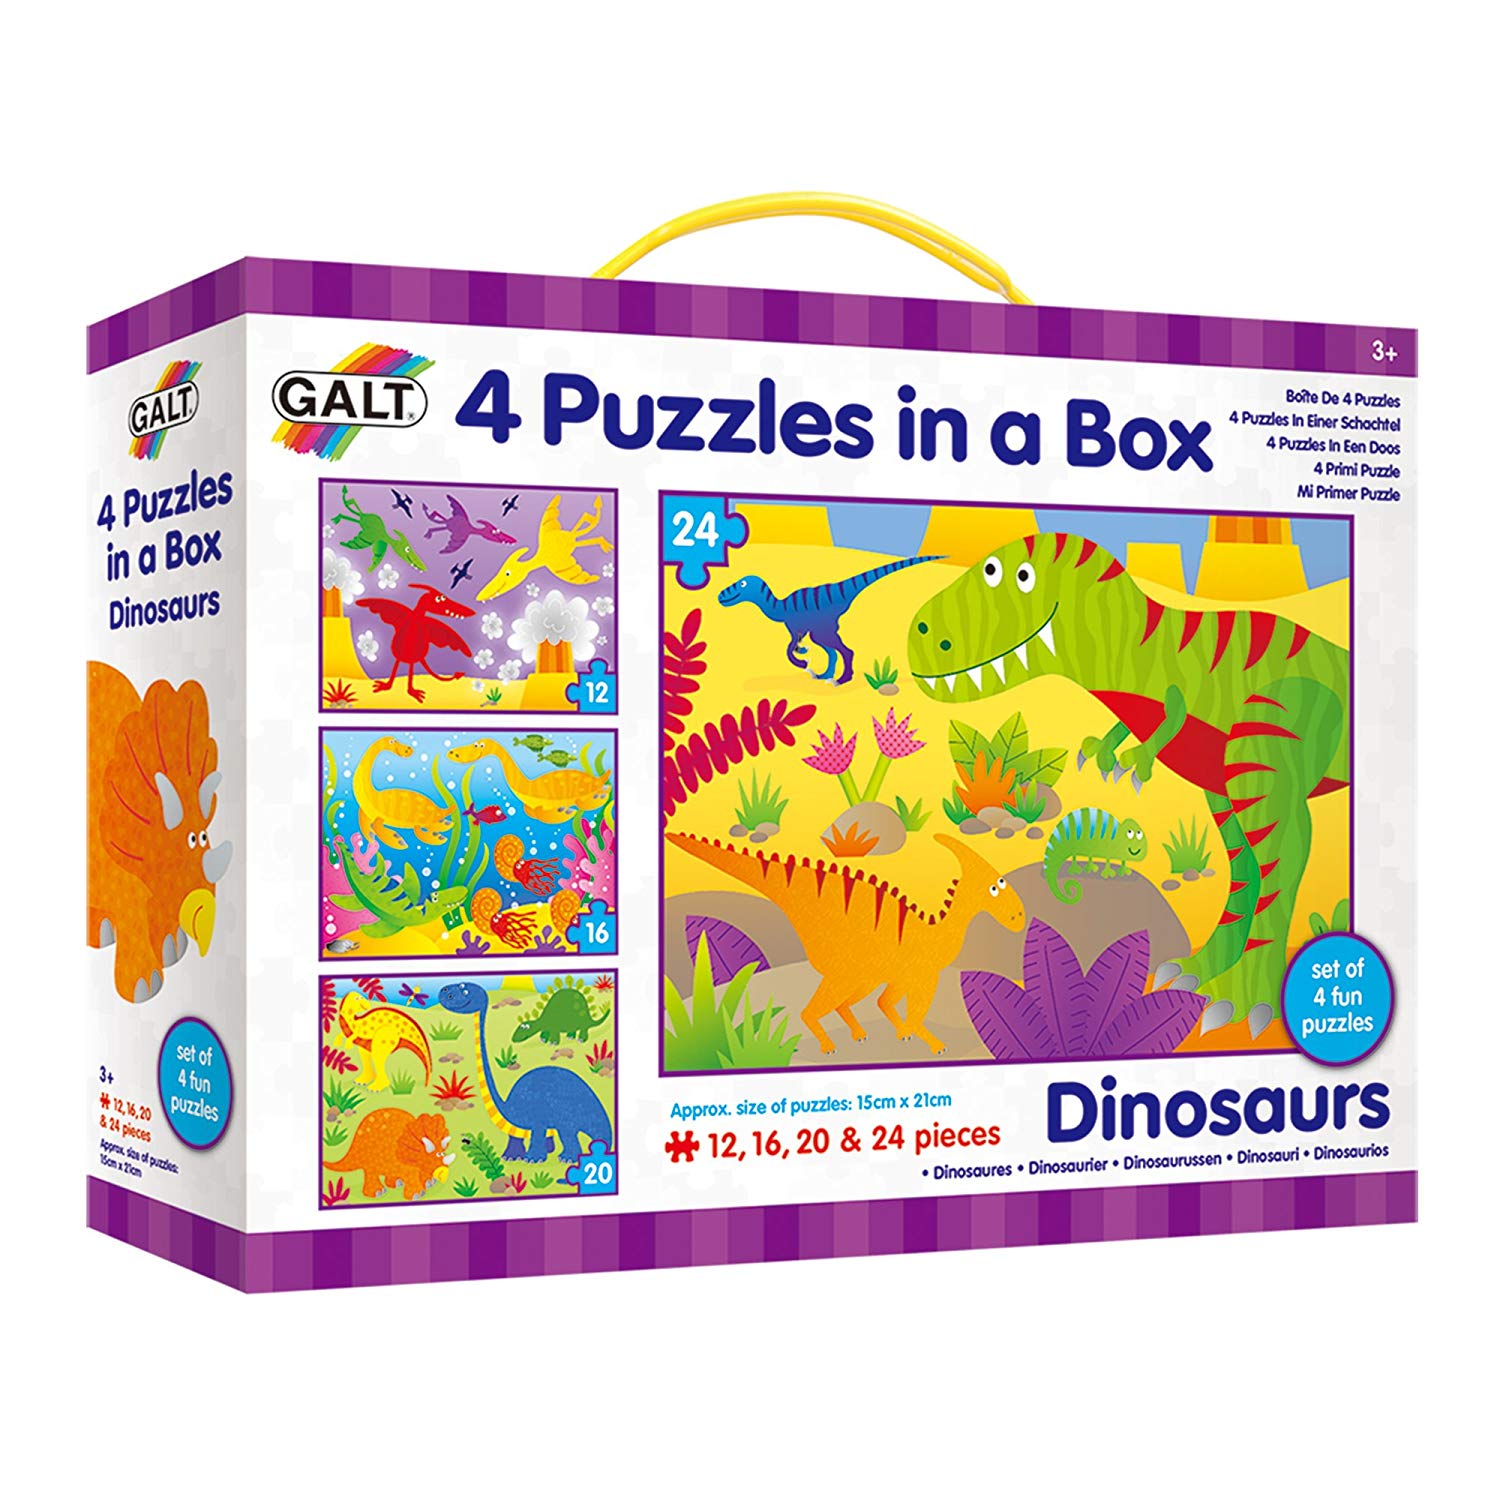 4 Puzzles in a Box Dinosaur Jigsaw Puzzle for Kids Ages Galt Toys Dinosaurs 